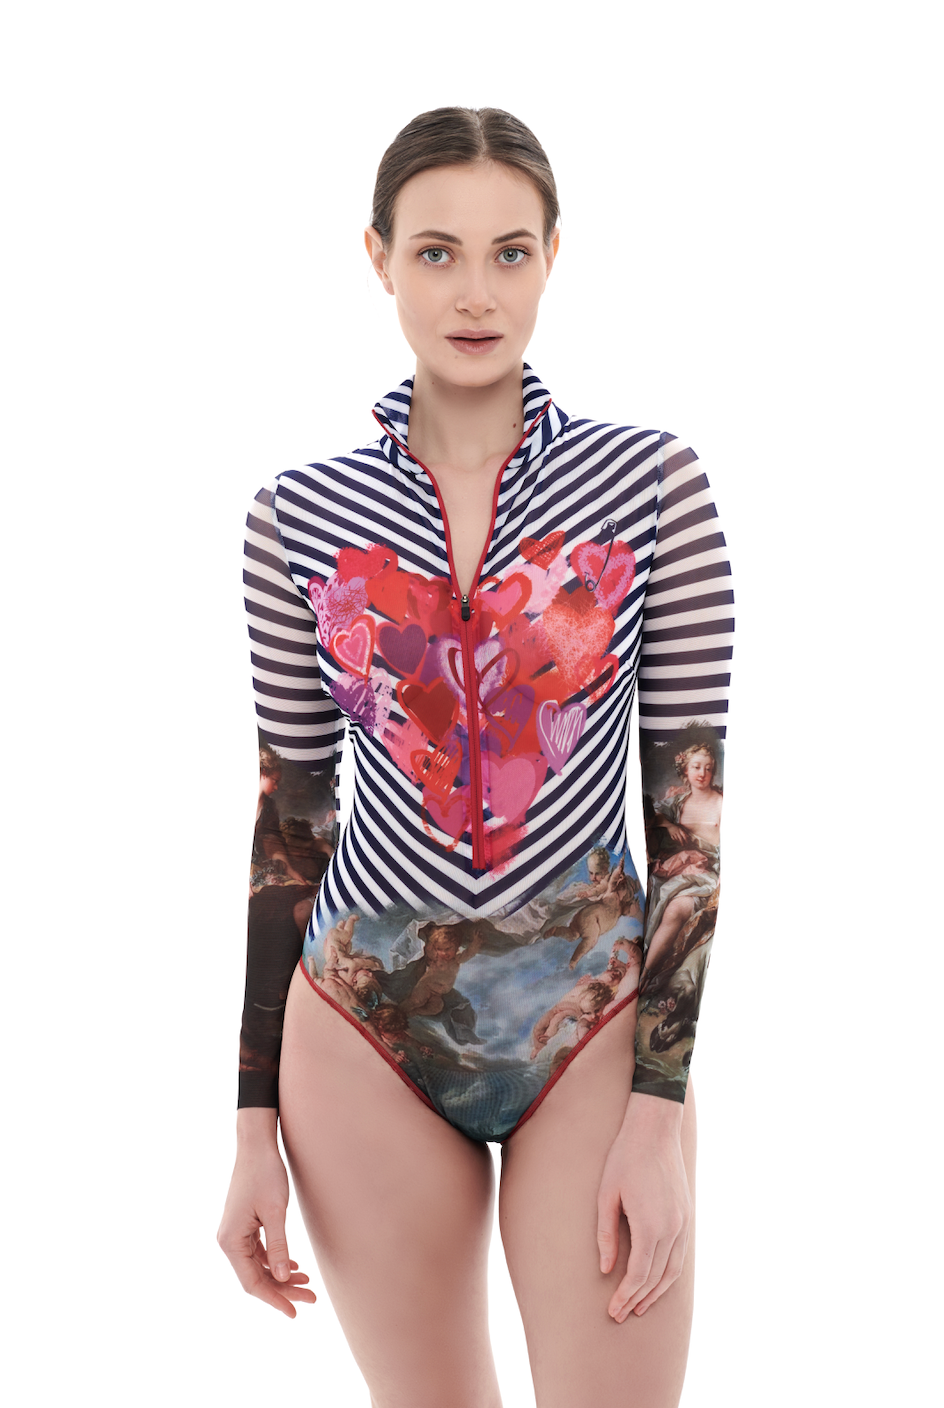 This file showcases sustainable tan-through smart swimsuits featuring a chic Stripes print. With a zipper swimsuit design and sleeves, it offers both style and SPF35 sun protection